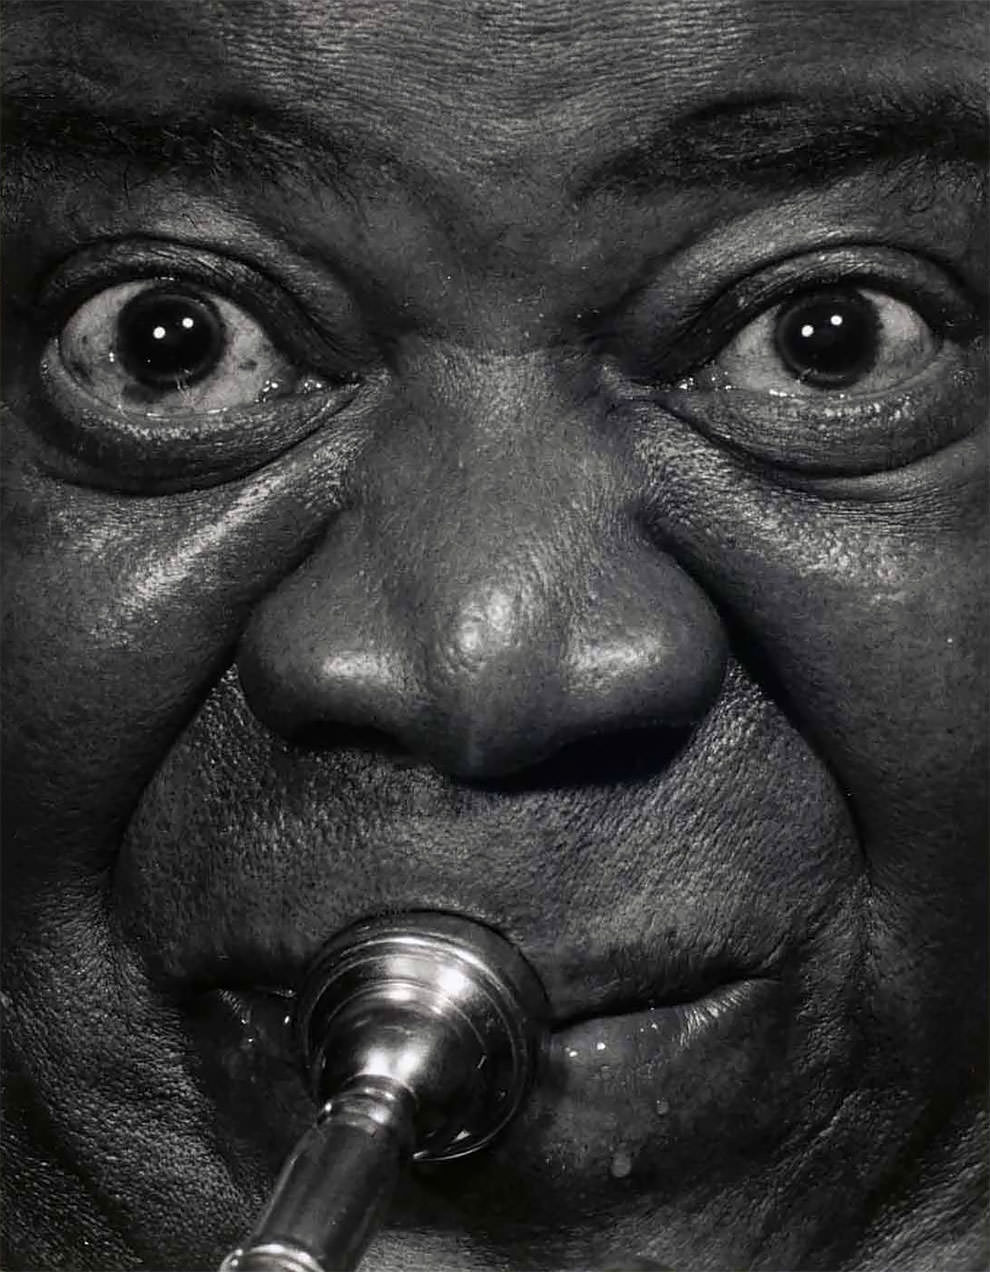 The American trumpeter, singer, composer and conductor Louis Armstrong. New York City, Halsman’s studio. 15th April 1966.